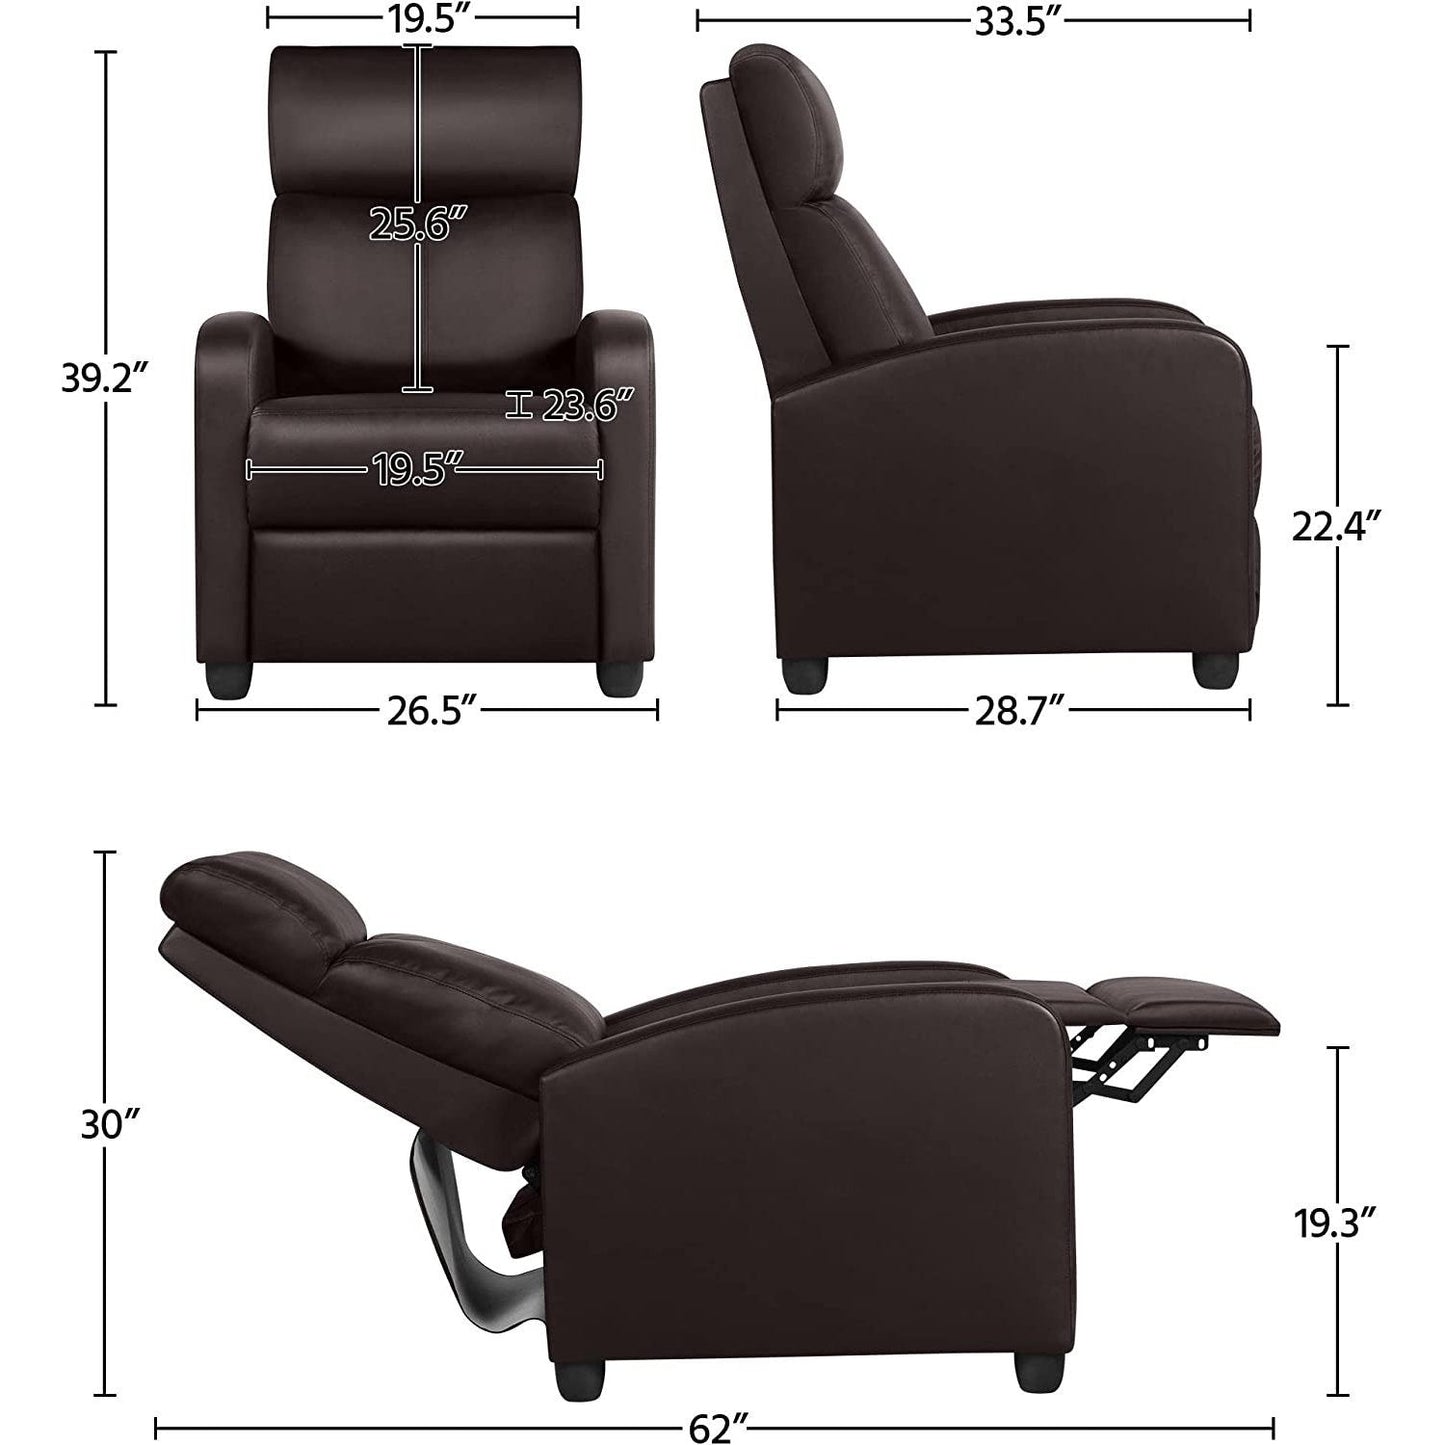 Living Room > Recliners And Chaise Lounge - Dark Brown High-Density Faux Leather Push Back Recliner Chair